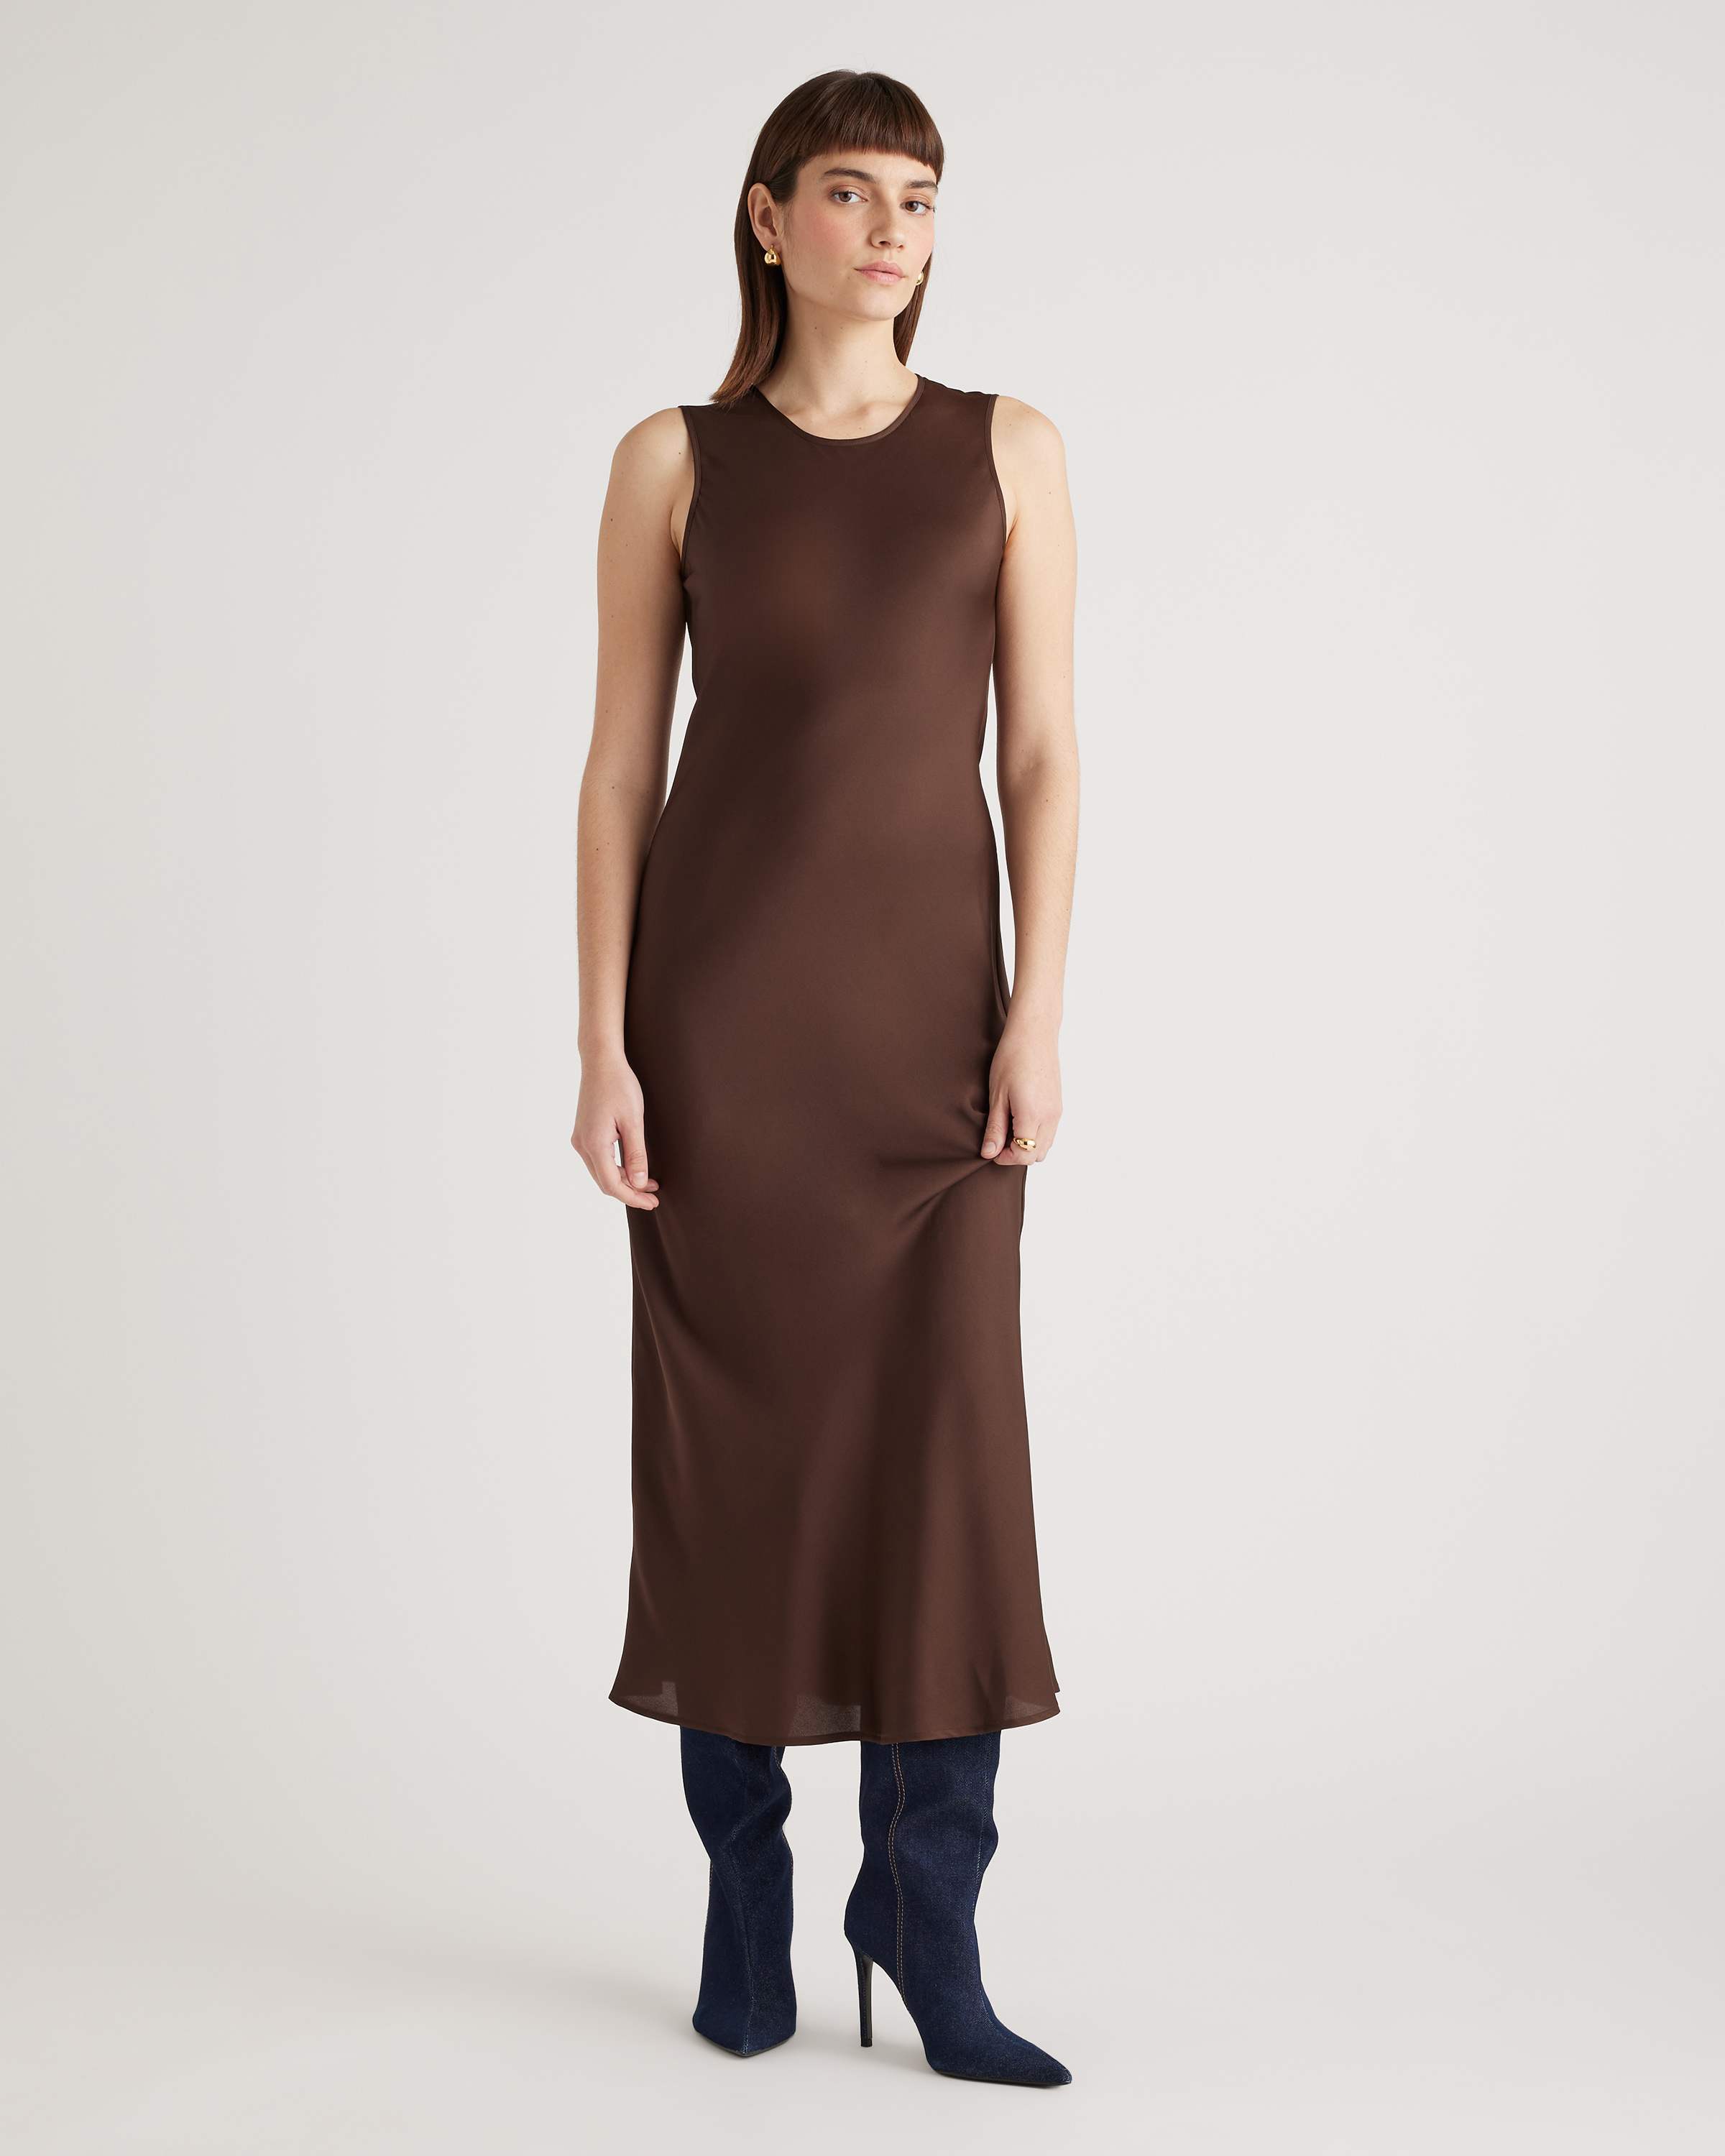 Skims dress dupe linked in my  storefront in bio! Colors